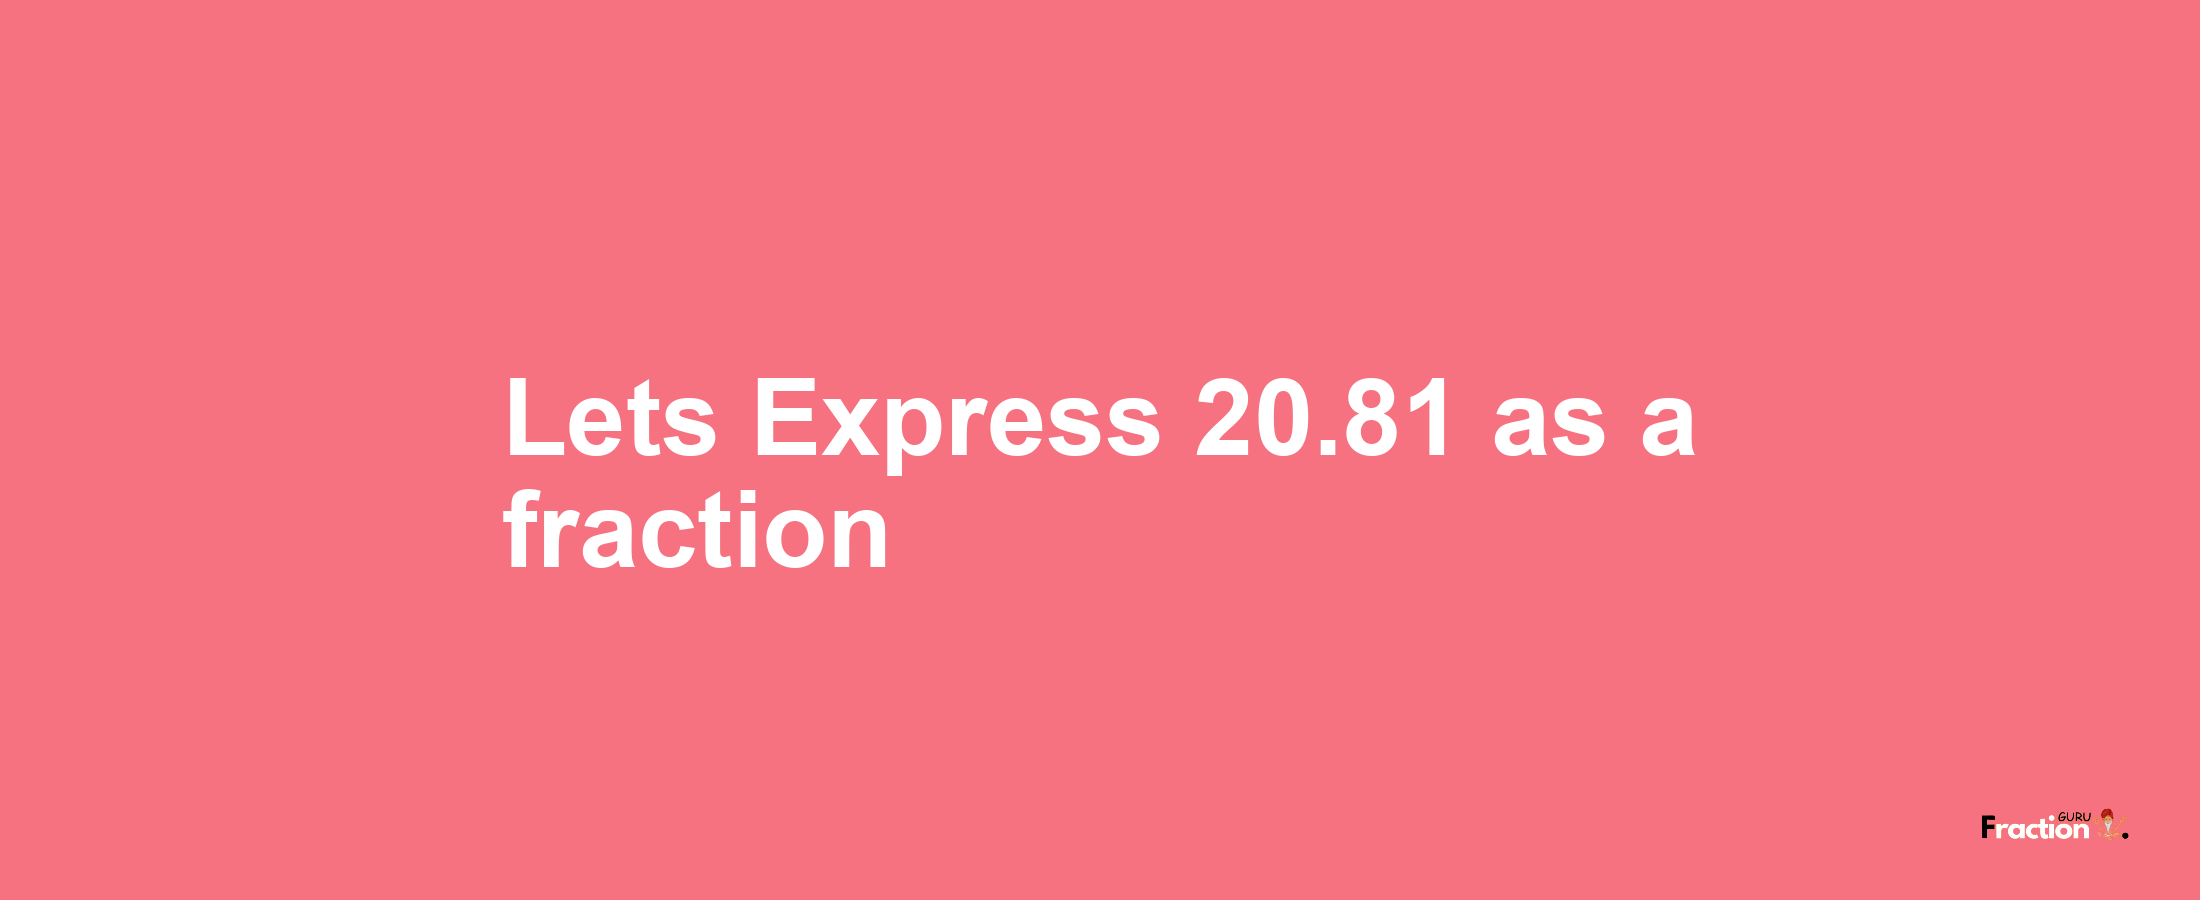 Lets Express 20.81 as afraction